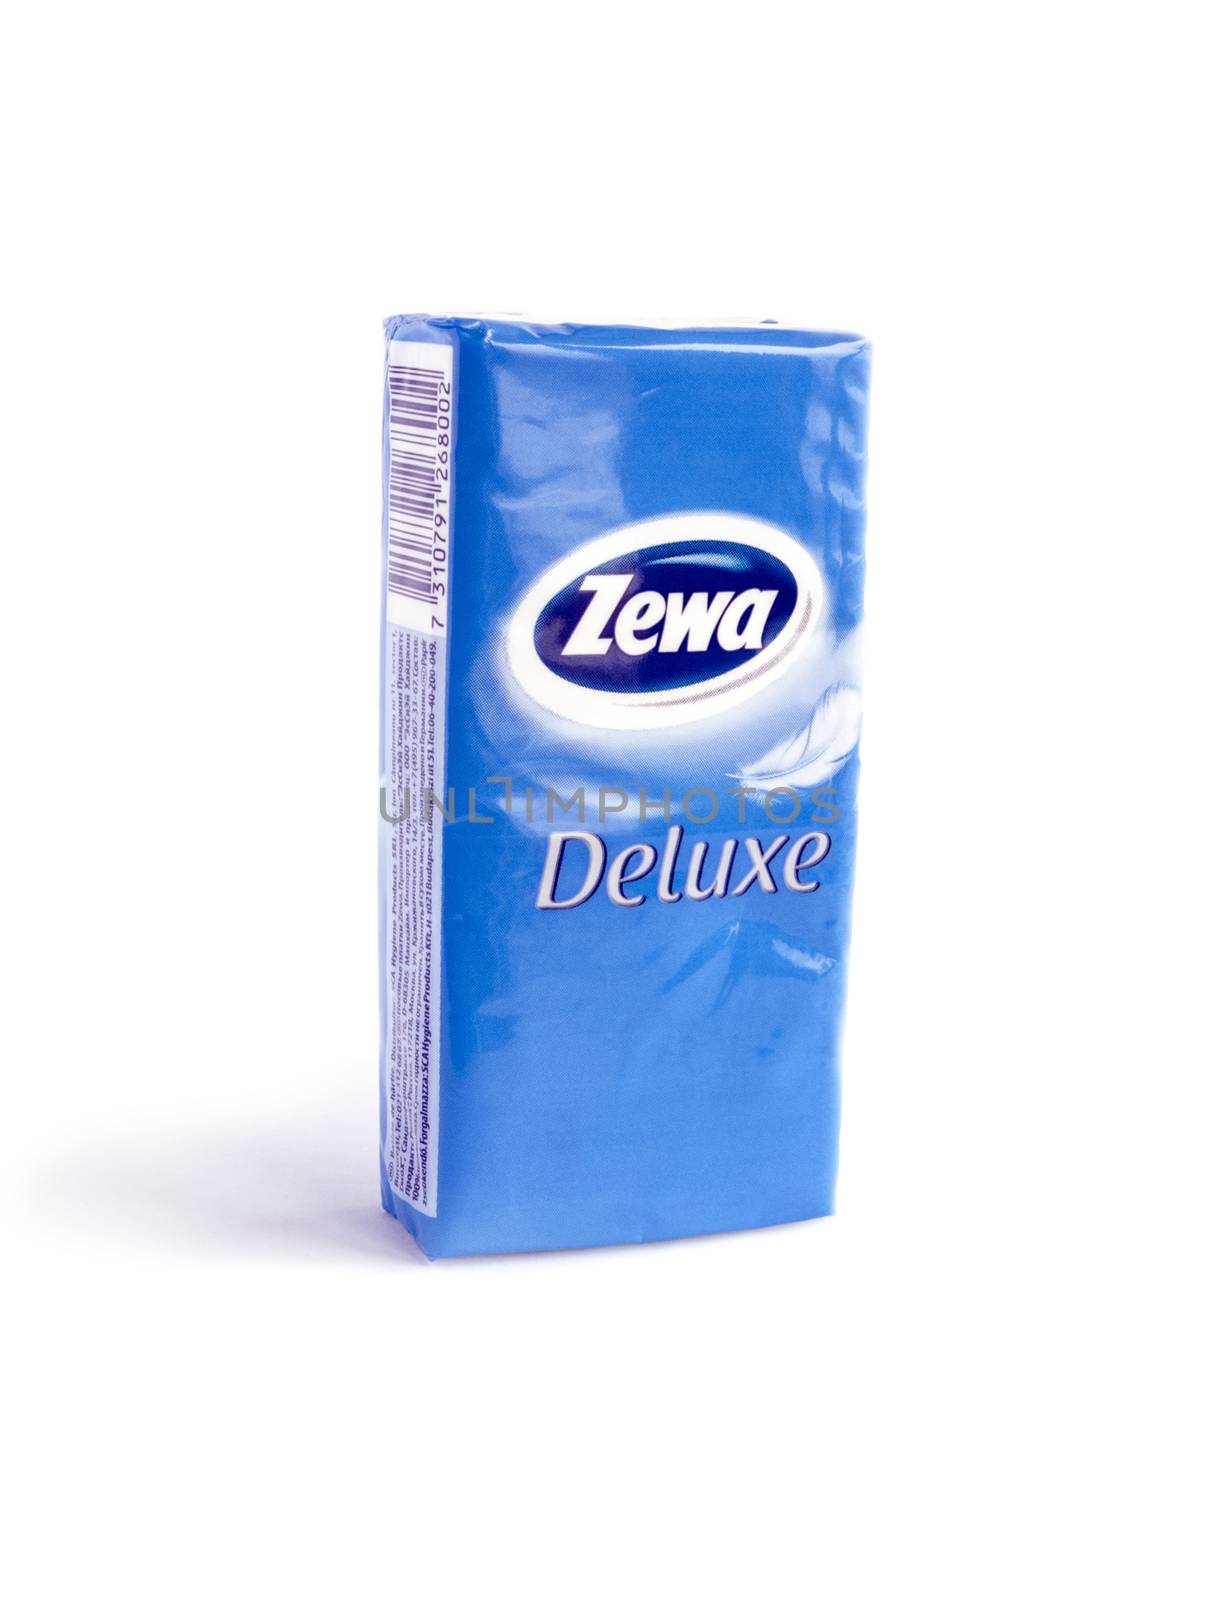 Bucharest, Romania - Jan 24, 2014: A pack of Zewa Deluxe napkins isolated on white background. In the consumer tissue sector, Zewa supplies toilet paper, household towels and handkerchieves/facials.